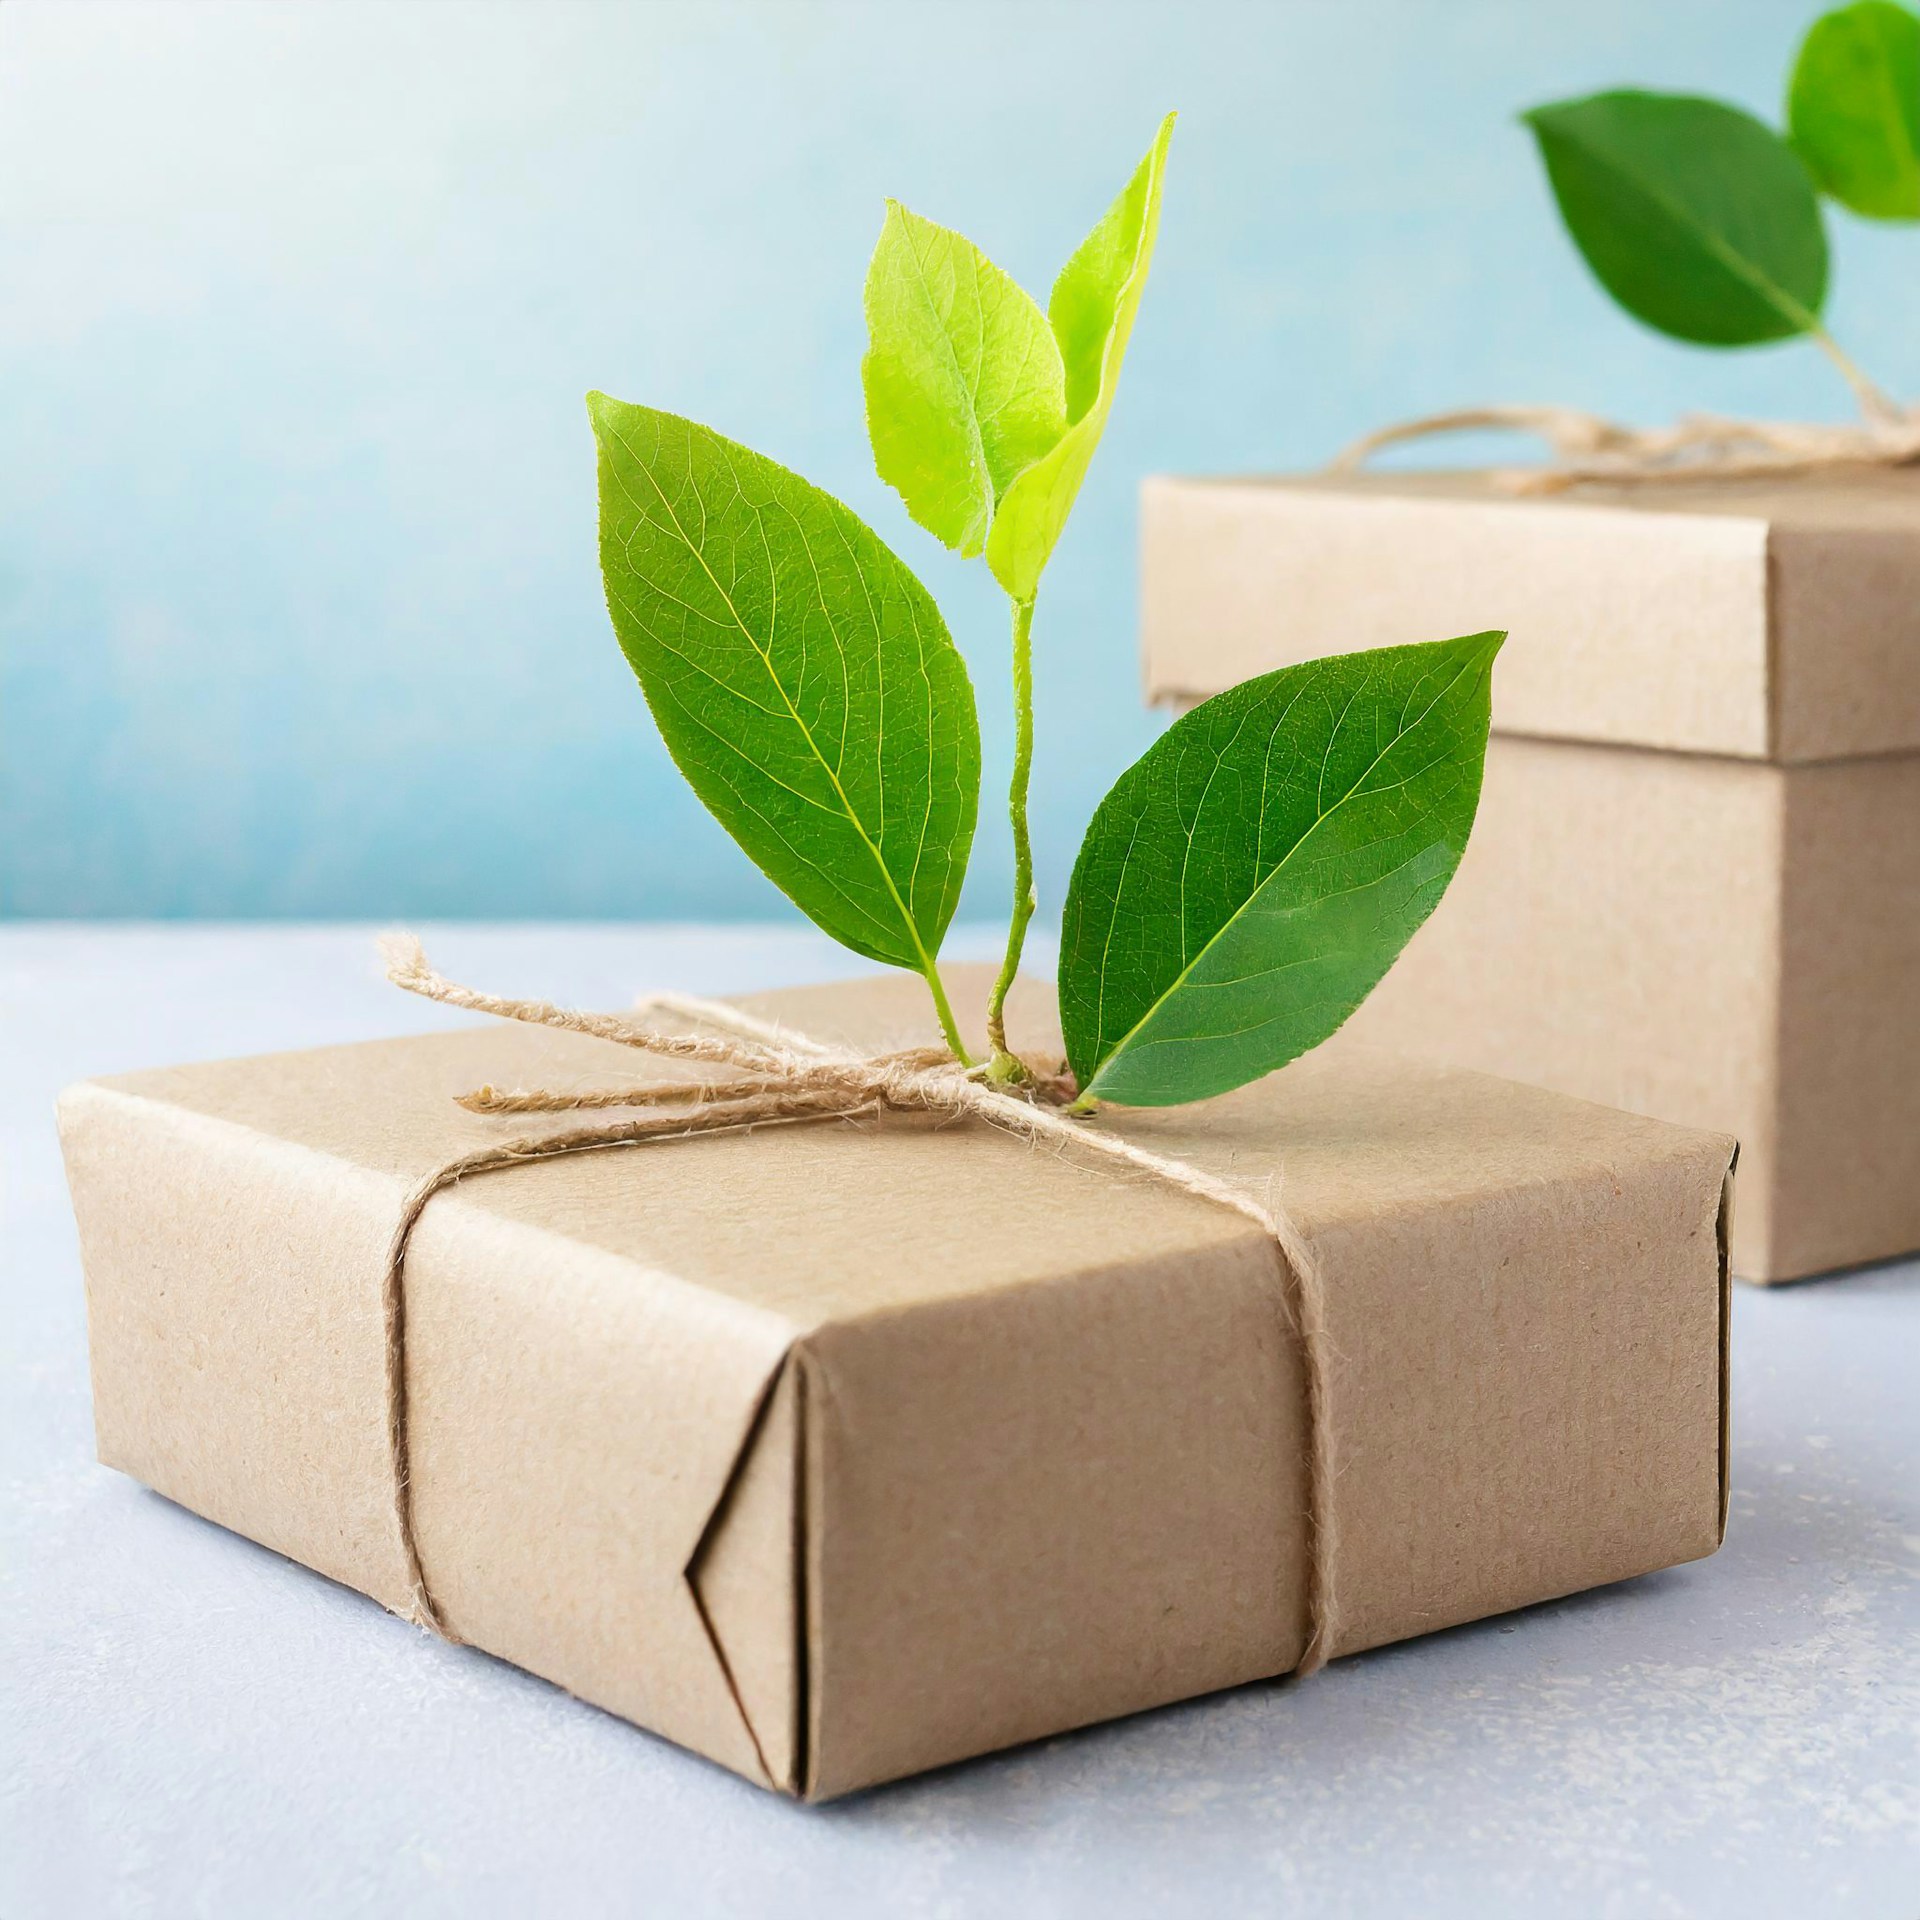 Ethical and sustainable corporate gift ideas